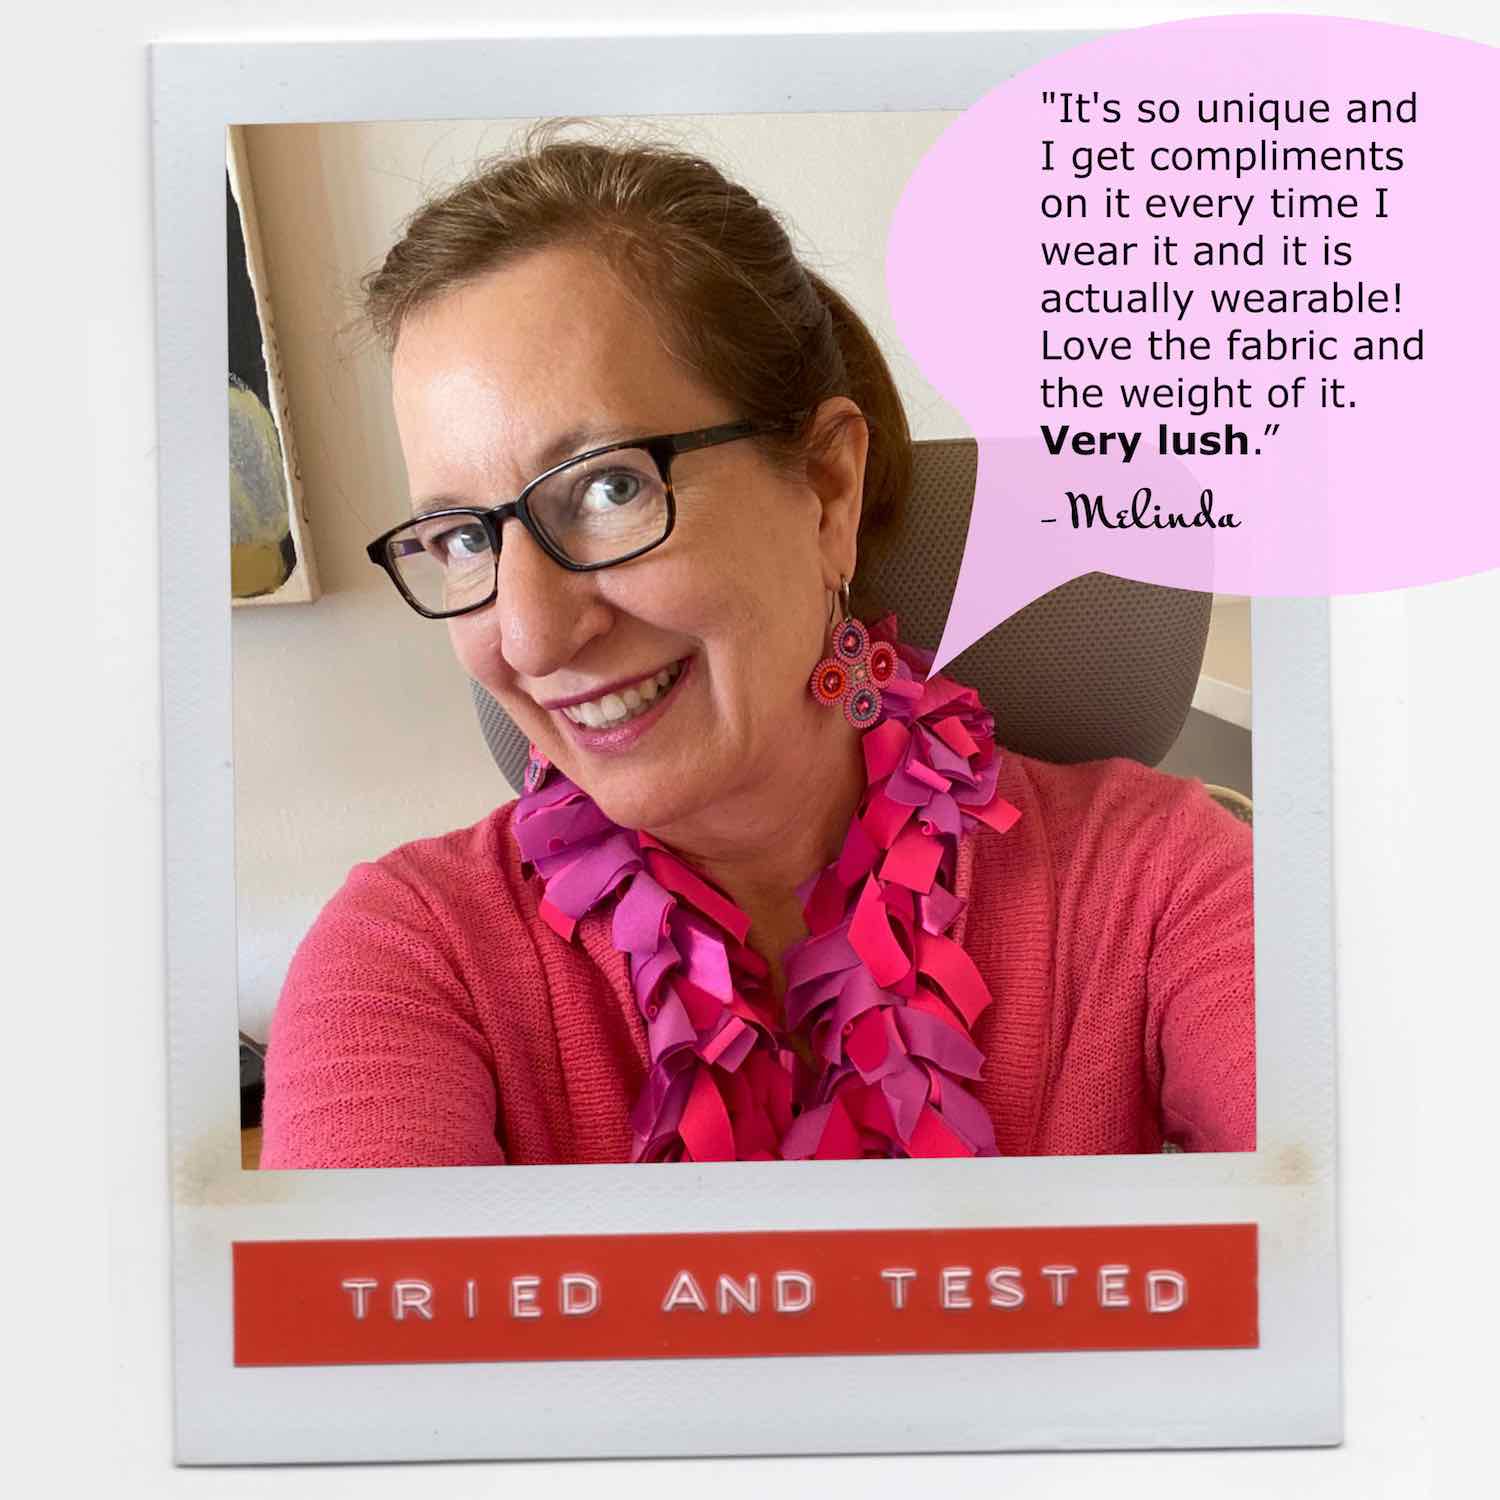 Melinda working from home and feeling stylish in pink wearing her lush colorful fashion boa scarf.